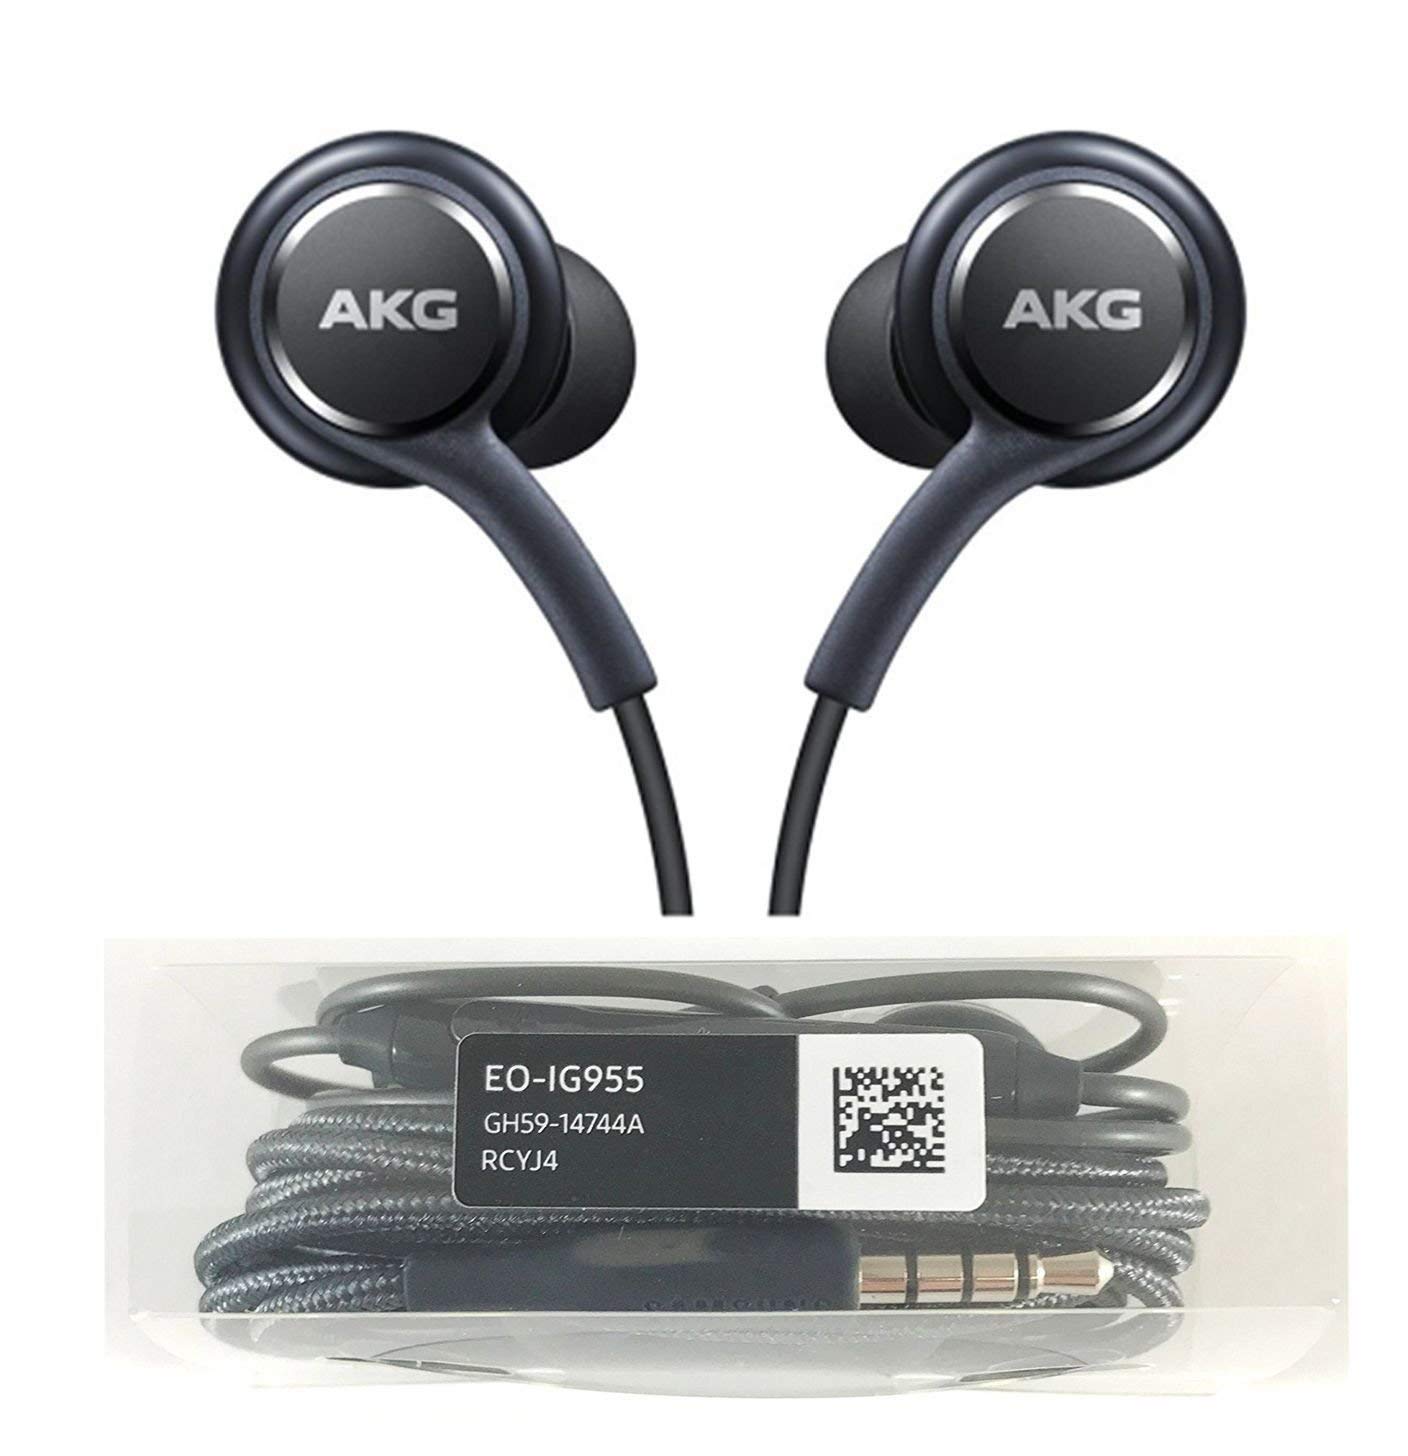 SAMSUNG AKG Wired Earbuds Original 3.5mm in-Ear Earbud Headphones with Remote & Microphone for Music, Phone Calls, Work - Noise Isolating Deep Bass, Includes Velvet Carrying Pouch - Black Visit the Samsung Store